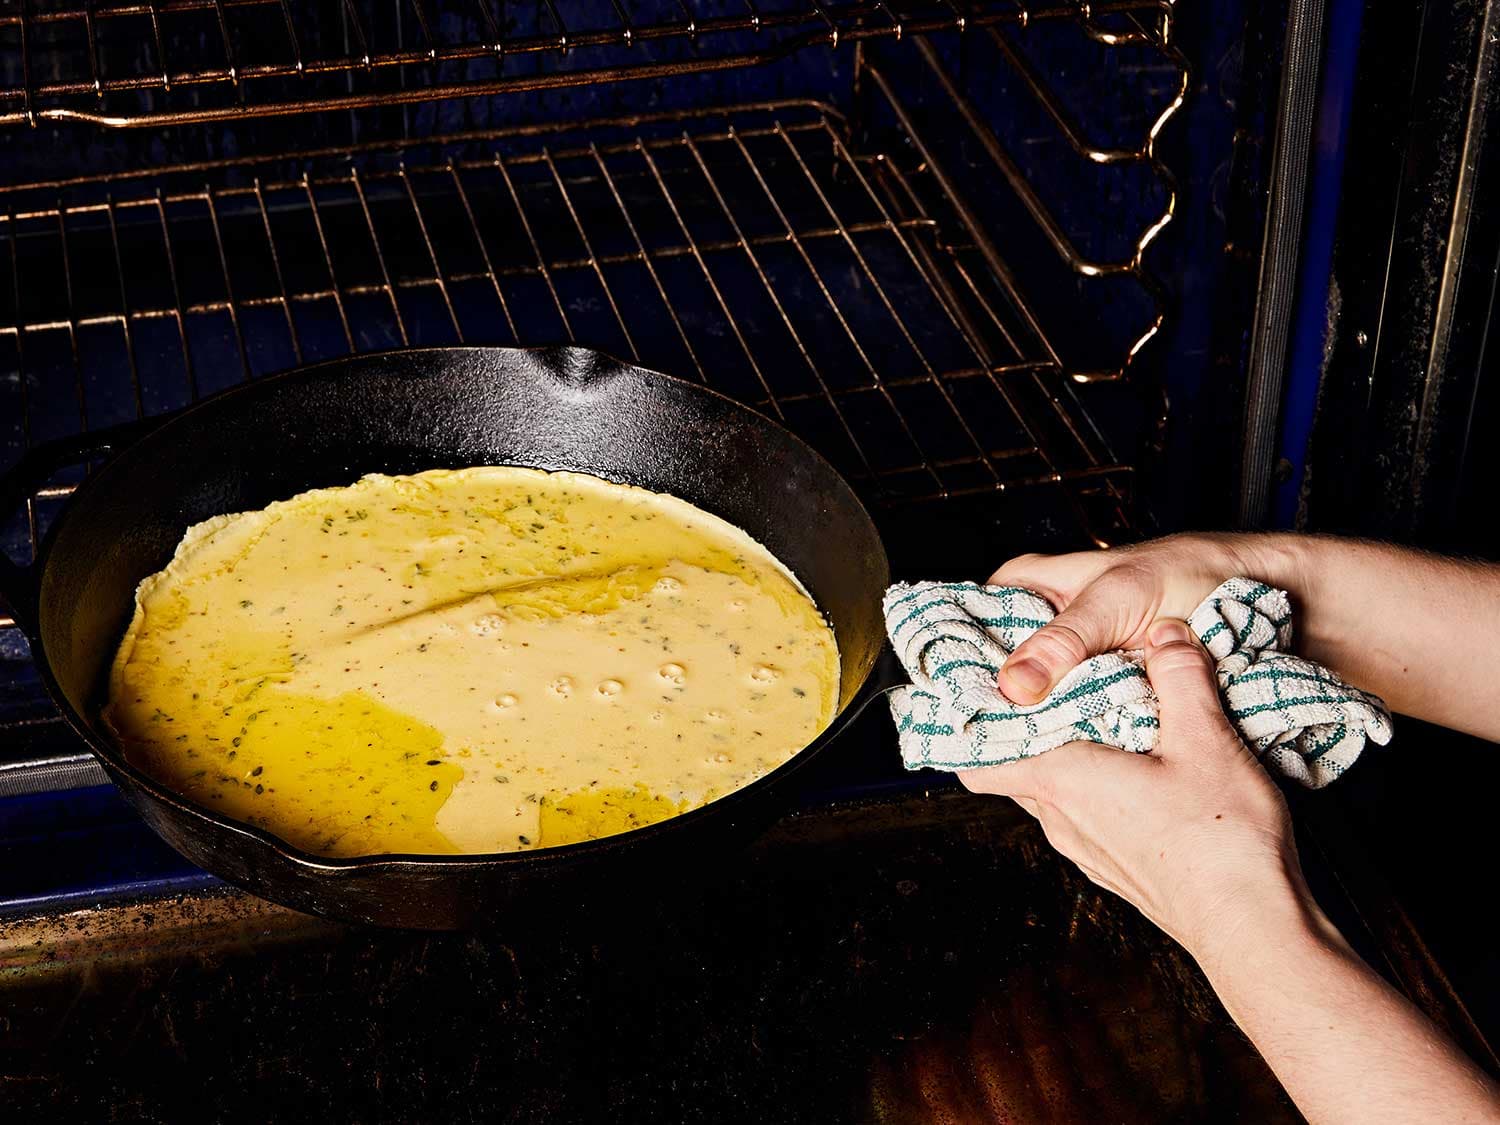 Carefully swirl the farinata batter until it covers the bottom of the skillet.